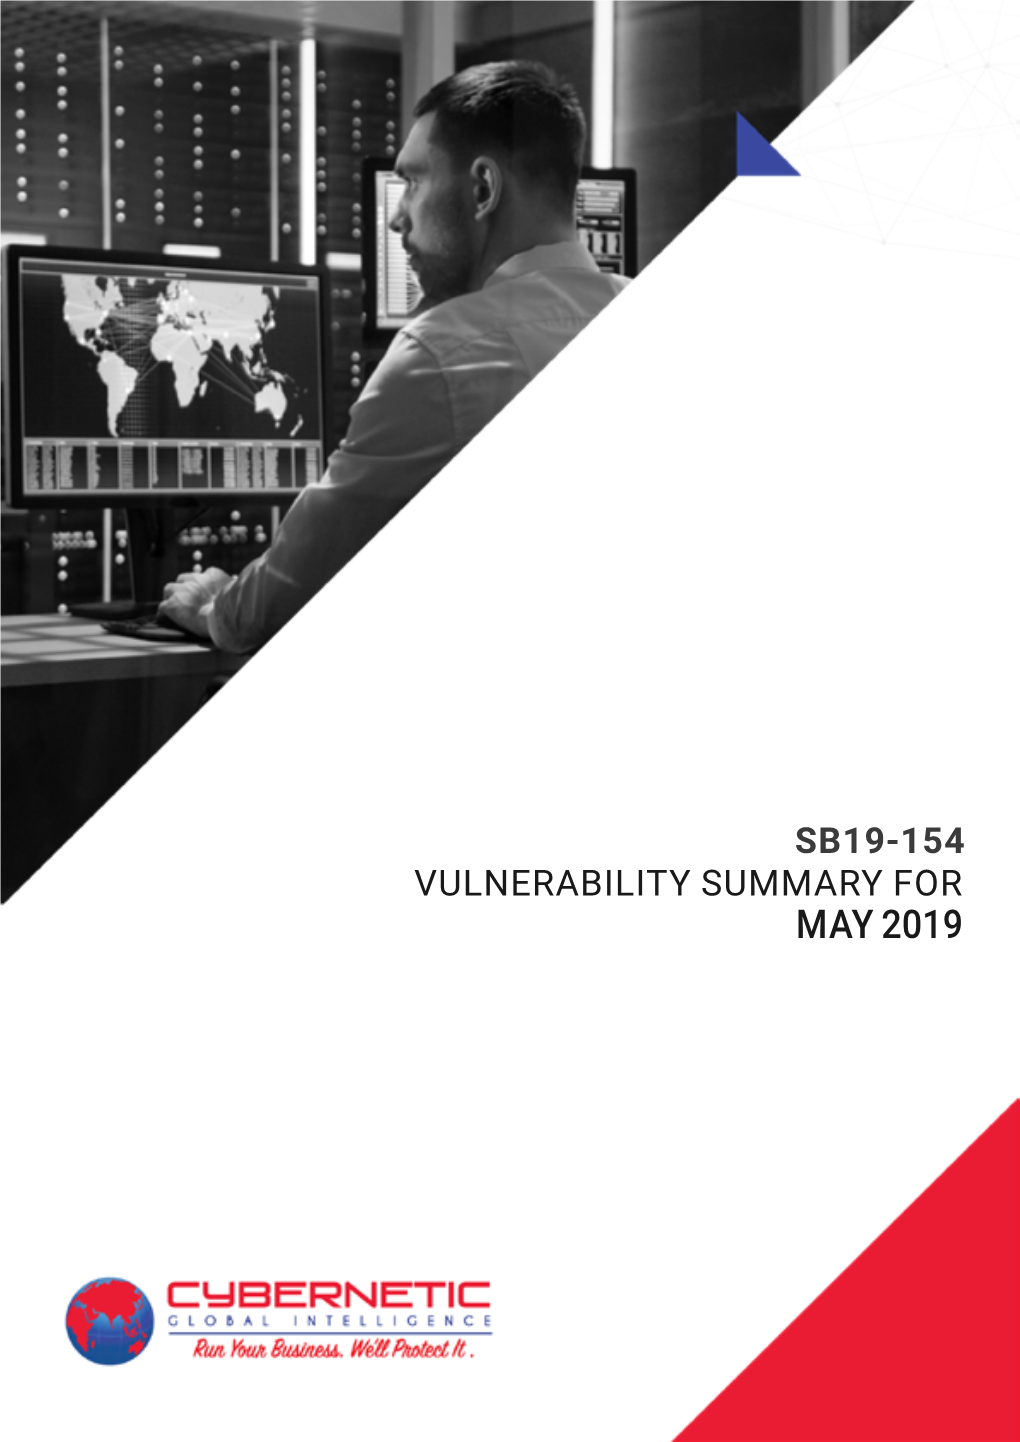 Vulnerability Summary Report of May, 2019